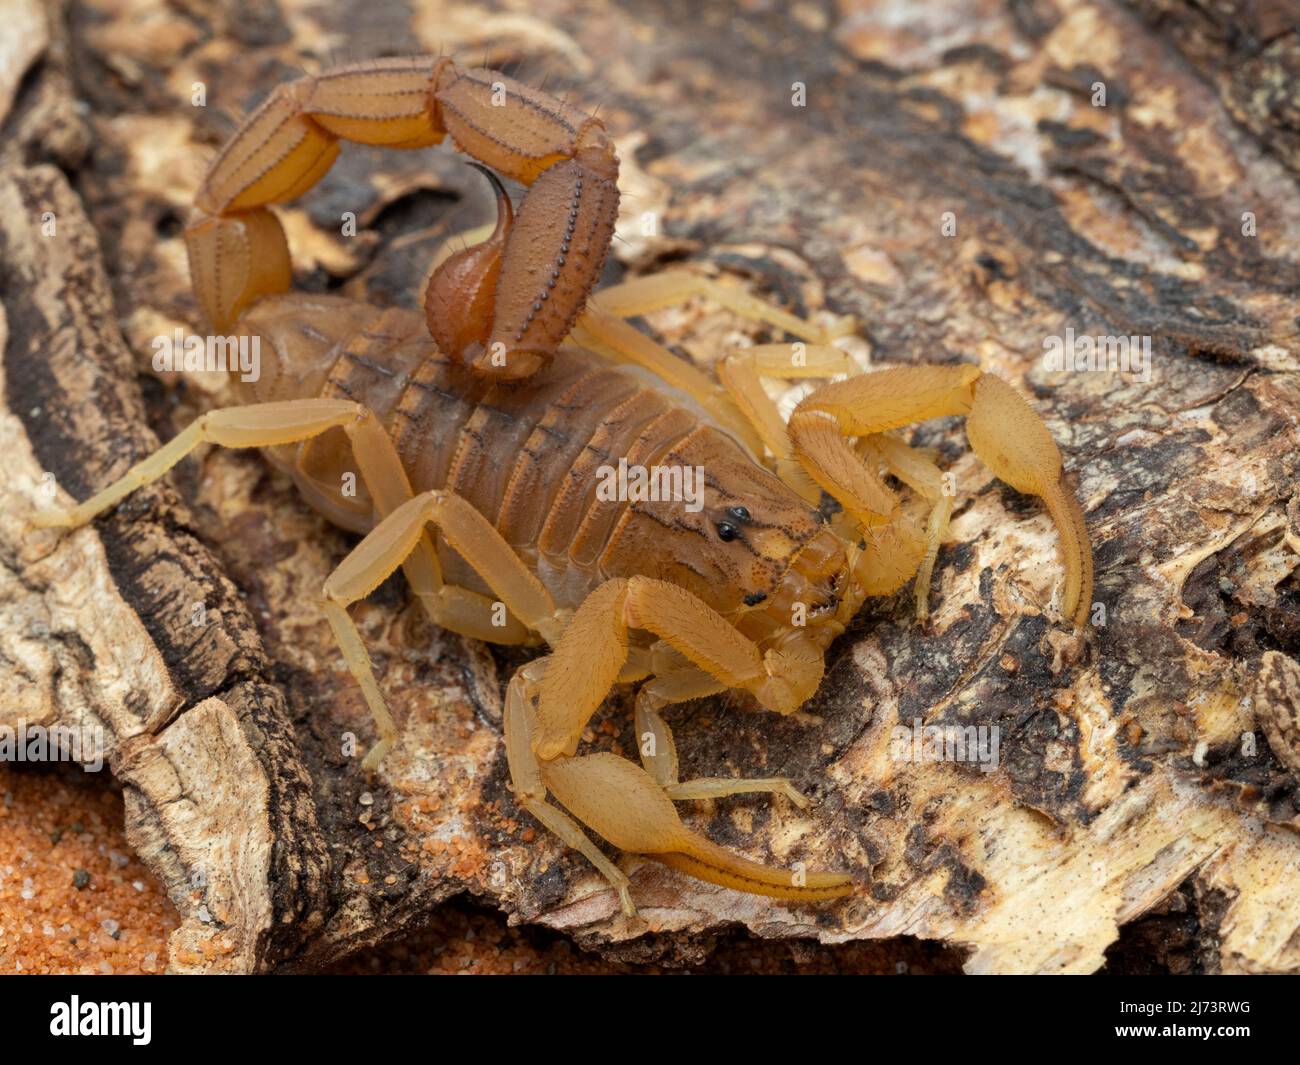 Pretty Indian red scorpion (Hottentotta tamulus) resting on bark, a highly venomous species from India, Pakistan, Nepal and Sri Lanka Stock Photo